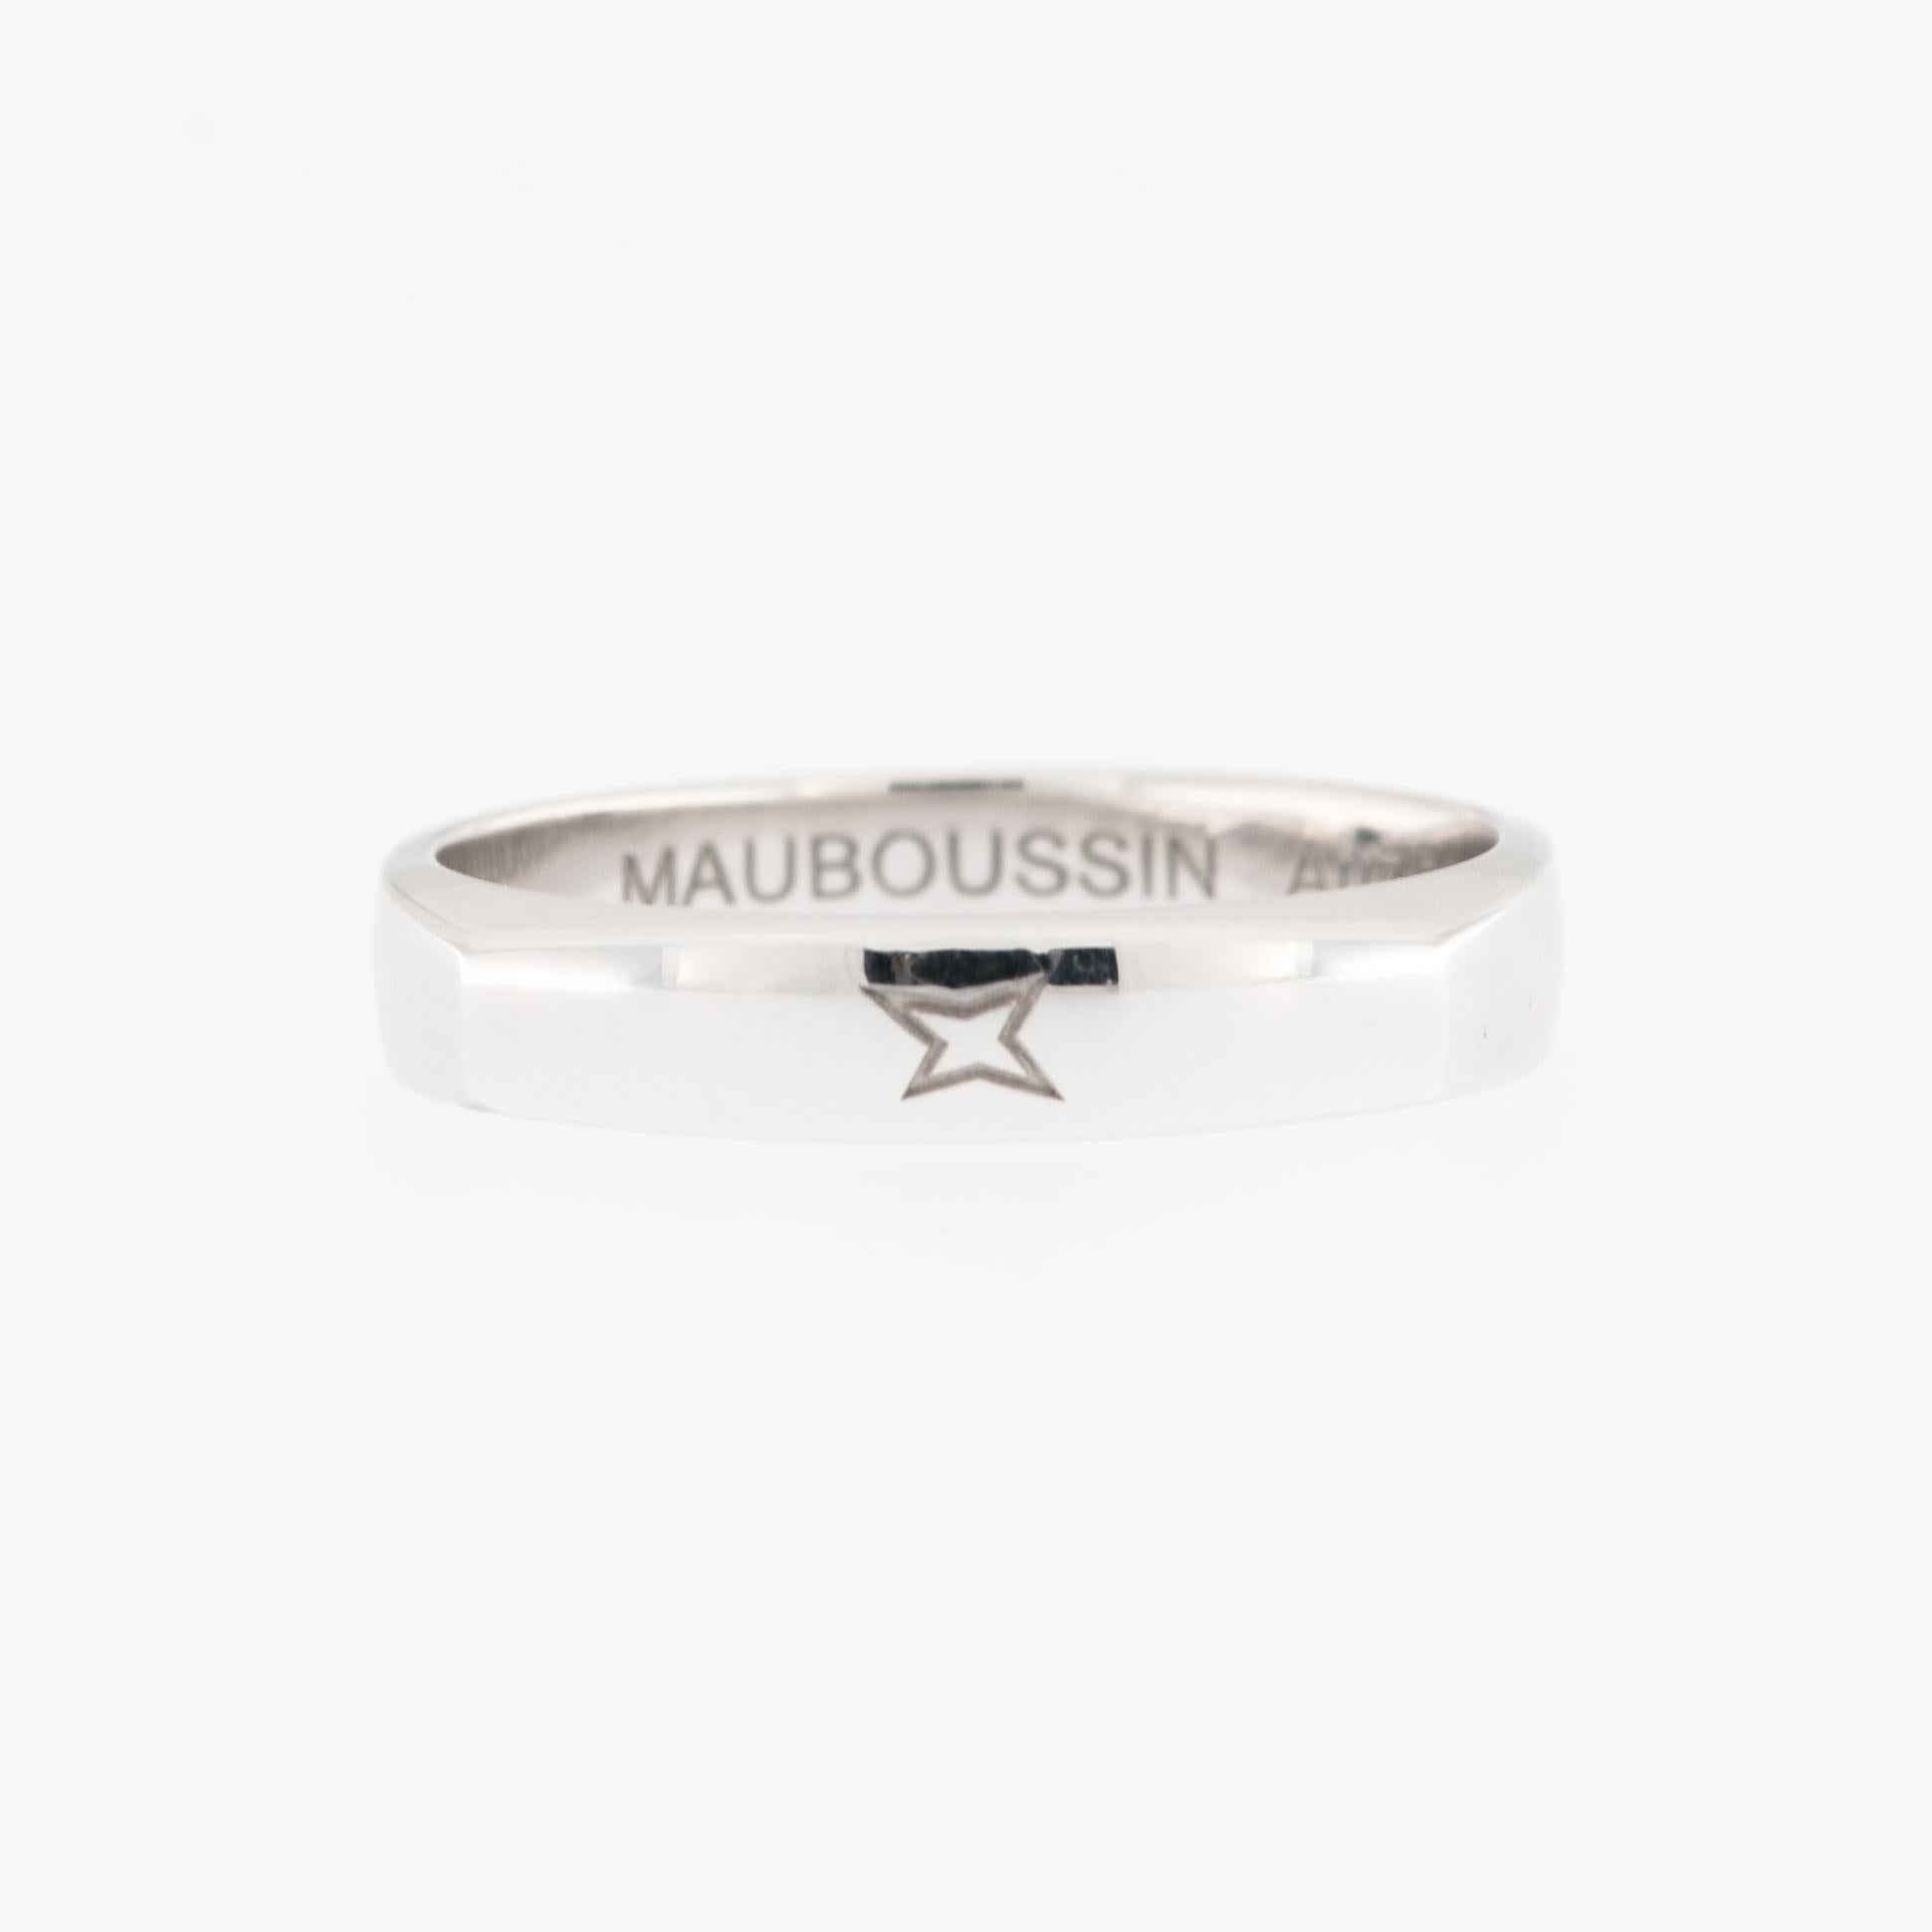 Mauboussin 18 karat White Gold Band Ring  In Good Condition For Sale In Esch-Sur-Alzette, LU